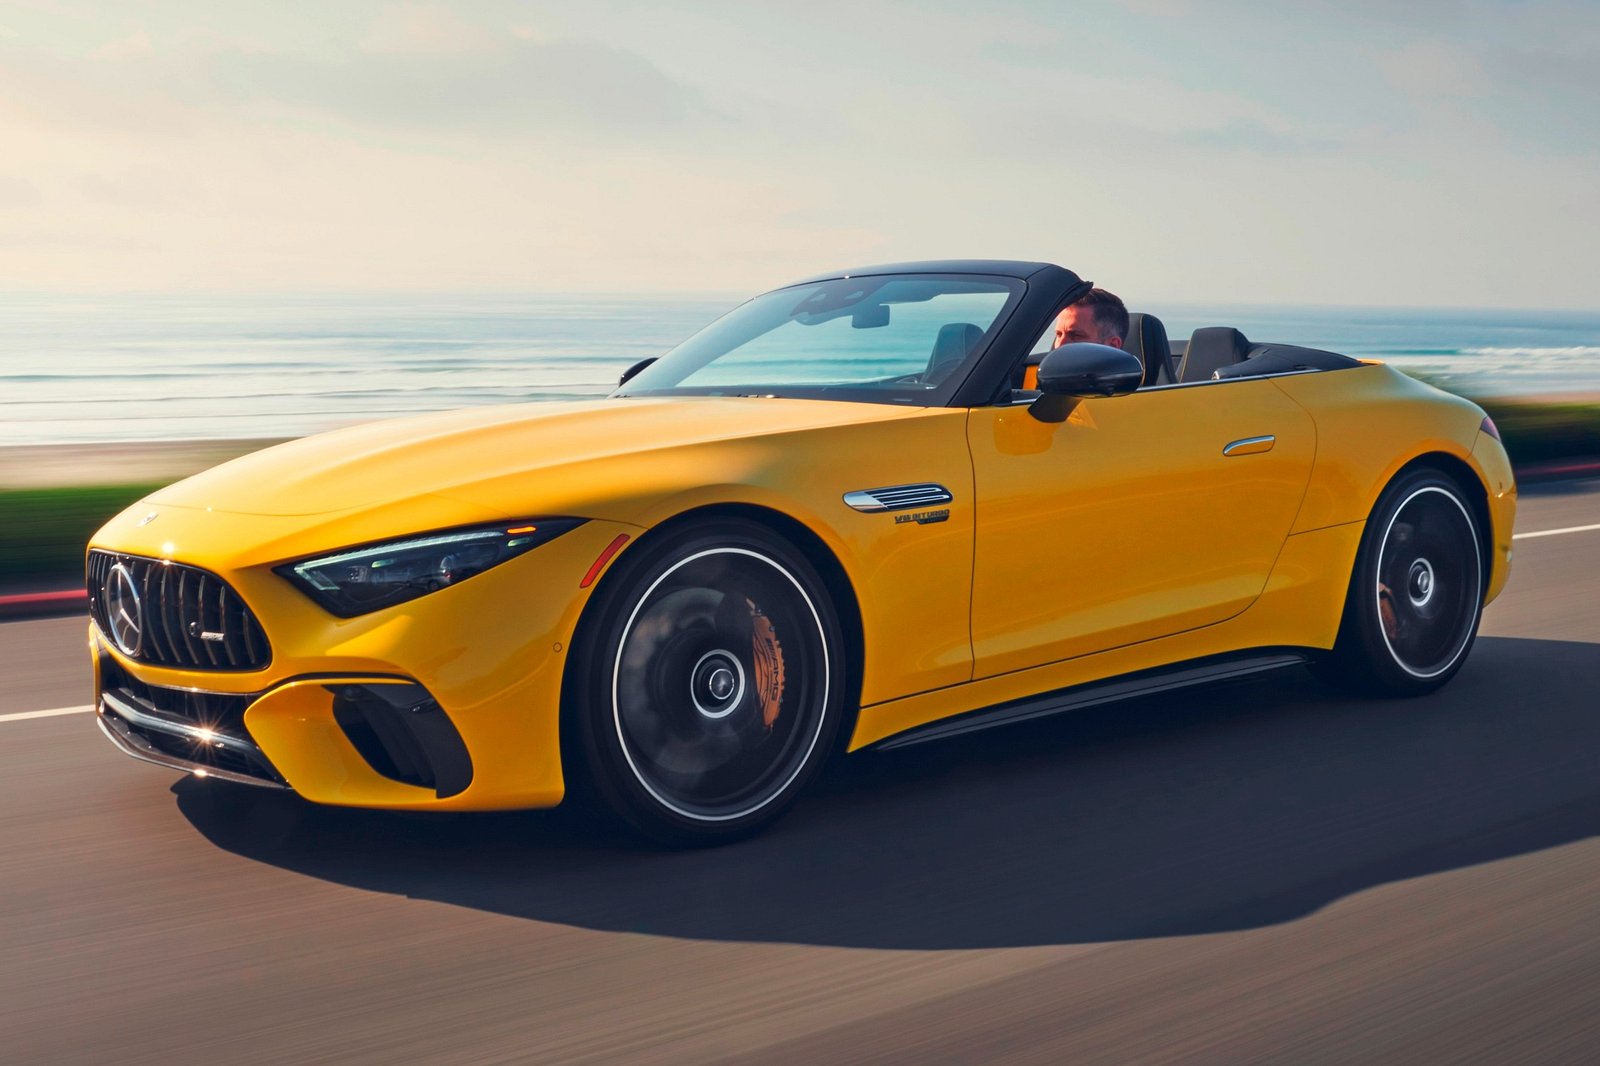 2022-2024 Mercedes-AMG SL 63 Driving Front Angle